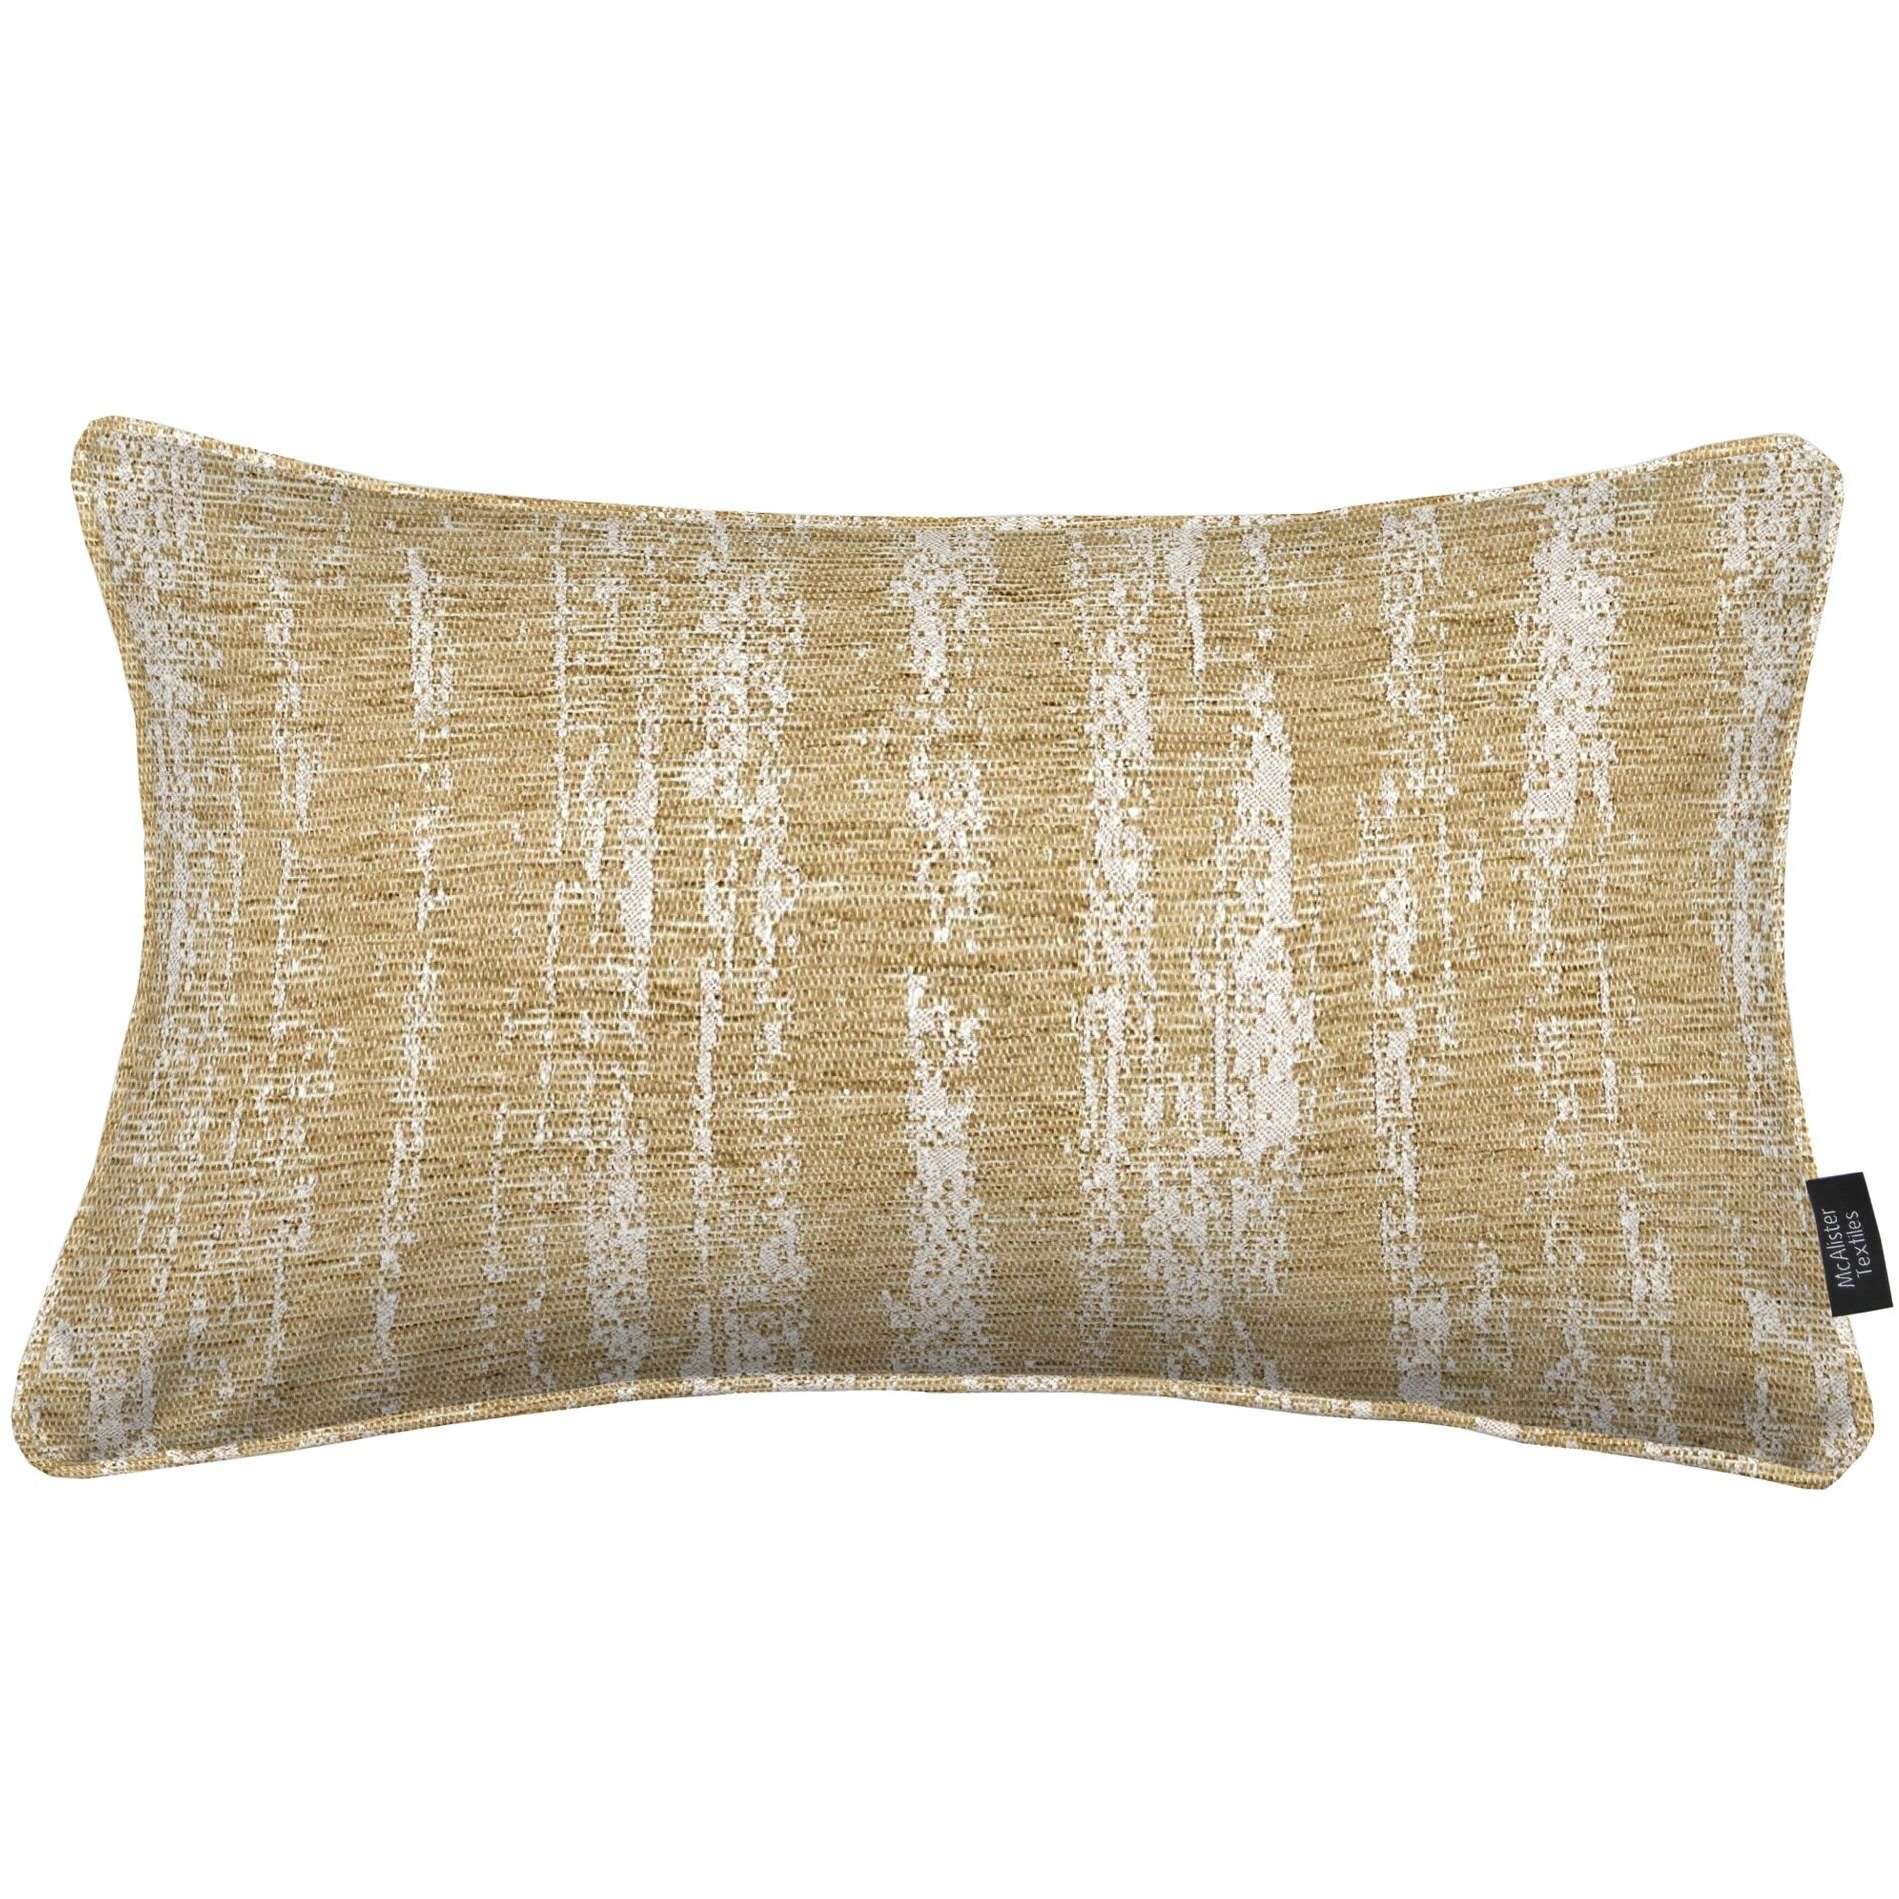 McAlister Textiles Textured Chenille Beige Cream Pillow Pillow Cover Only 50cm x 30cm 